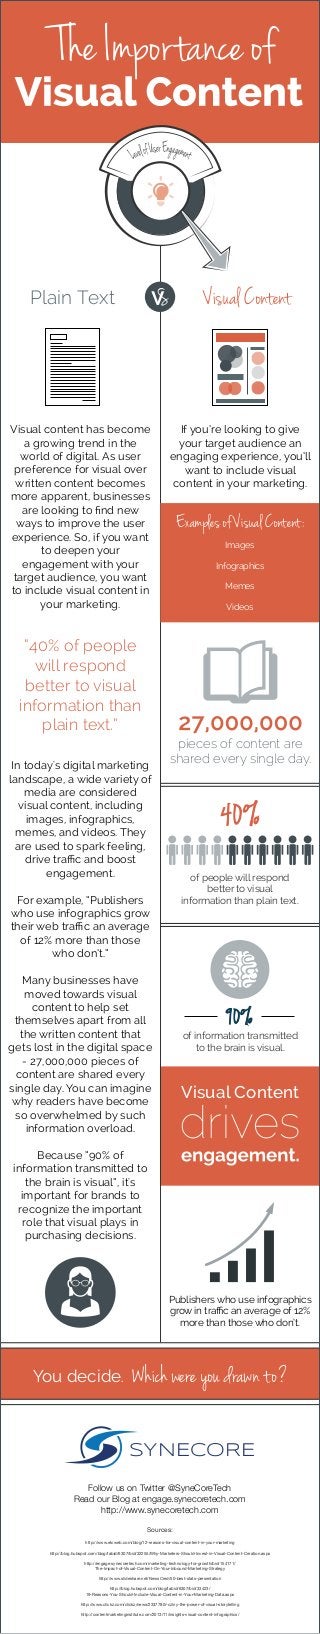 Visual Content
Visual content has become
a growing trend in the
world of digital. As user
preference for visual over
written content becomes
more apparent, businesses
are looking to ﬁnd new
ways to improve the user
experience. So, if you want
to deepen your
engagement with your
target audience, you want
to include visual content in
your marketing.
In today's digital marketing
landscape, a wide variety of
media are considered
visual content, including
images, infographics,
memes, and videos. They
are used to spark feeling,
drive traﬃc and boost
engagement.
For example, “Publishers
who use infographics grow
their web traﬃc an average
of 12% more than those
who don’t.”
Many businesses have
moved towards visual
content to help set
themselves apart from all
the written content that
gets lost in the digital space
- 27,000,000 pieces of
content are shared every
single day. You can imagine
why readers have become
so overwhelmed by such
information overload.
Because “90% of
information transmitted to
the brain is visual”, it's
important for brands to
recognize the important
role that visual plays in
purchasing decisions.
SYNECORE
Follow us on Twitter @SyneCoreTech
Read our Blog at engage.synecoretech.com
http://www.synecoretech.com
The Importance of
You decide. Which were you drawn to?
90%
of information transmitted
to the brain is visual.
“40% of people
will respond
better to visual
information than
plain text.”
Publishers who use infographics
grow in traﬃc an average of 12%
more than those who don’t.
Plain Text Visual Content
If you’re looking to give
your target audience an
engaging experience, you’ll
want to include visual
content in your marketing.
Examples of Visual Content:
Images
Infographics
Memes
Videos
pieces of content are
shared every single day.
of people will respond
better to visual
information than plain text.
Sources:
http://www.etcweb.com/blog/12-reasons-for-visual-content-in-your-marketing
http://blog.hubspot.com/blog/tabid/6307/bid/32255/Why-Marketers-Should-Invest-in-Visual-Content-Creation.aspx
http://engage.synecoretech.com/marketing-technology-for-growth/bid/154171/
The-Impact-of-Visual-Content-On-Your-Inbound-Marketing-Strategy
http://www.slideshare.net/NewsCred/50-best-stats-presentation
http://blog.hubspot.com/blog/tabid/6307/bid/33423/
19-Reasons-You-Should-Include-Visual-Content-in-Your-Marketing-Data.aspx
http://www.clickz.com/clickz/news/2337780/-czlny-the-power-of-visual-storytelling
http://contentmarketinginstitute.com/2013/11/insights-visual-content-infographics/
 